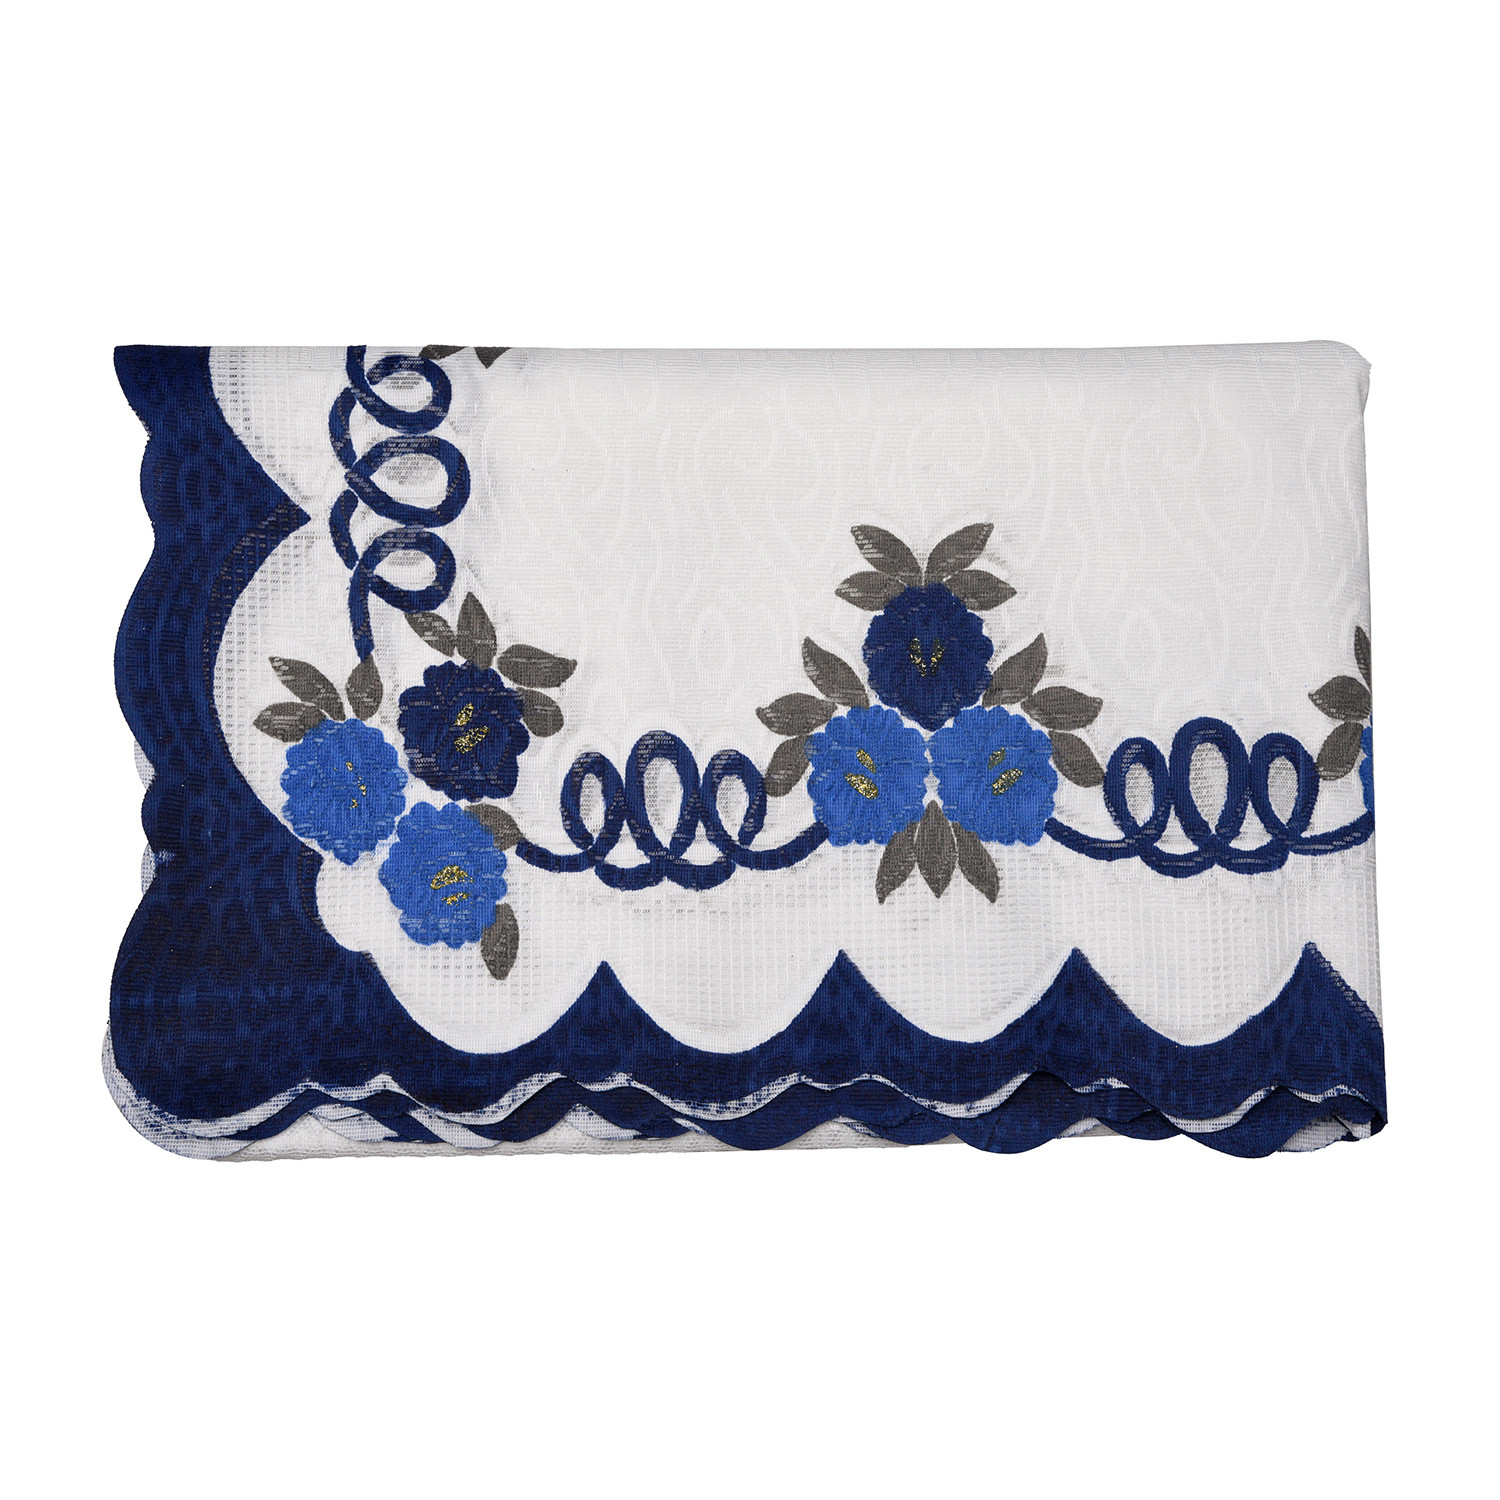 Kuber Industries Cotton Floral Print Waterproof Attractive Dining Table Cover|Tablecloth for Home Decorative, 60x90 Inch (White Blue)